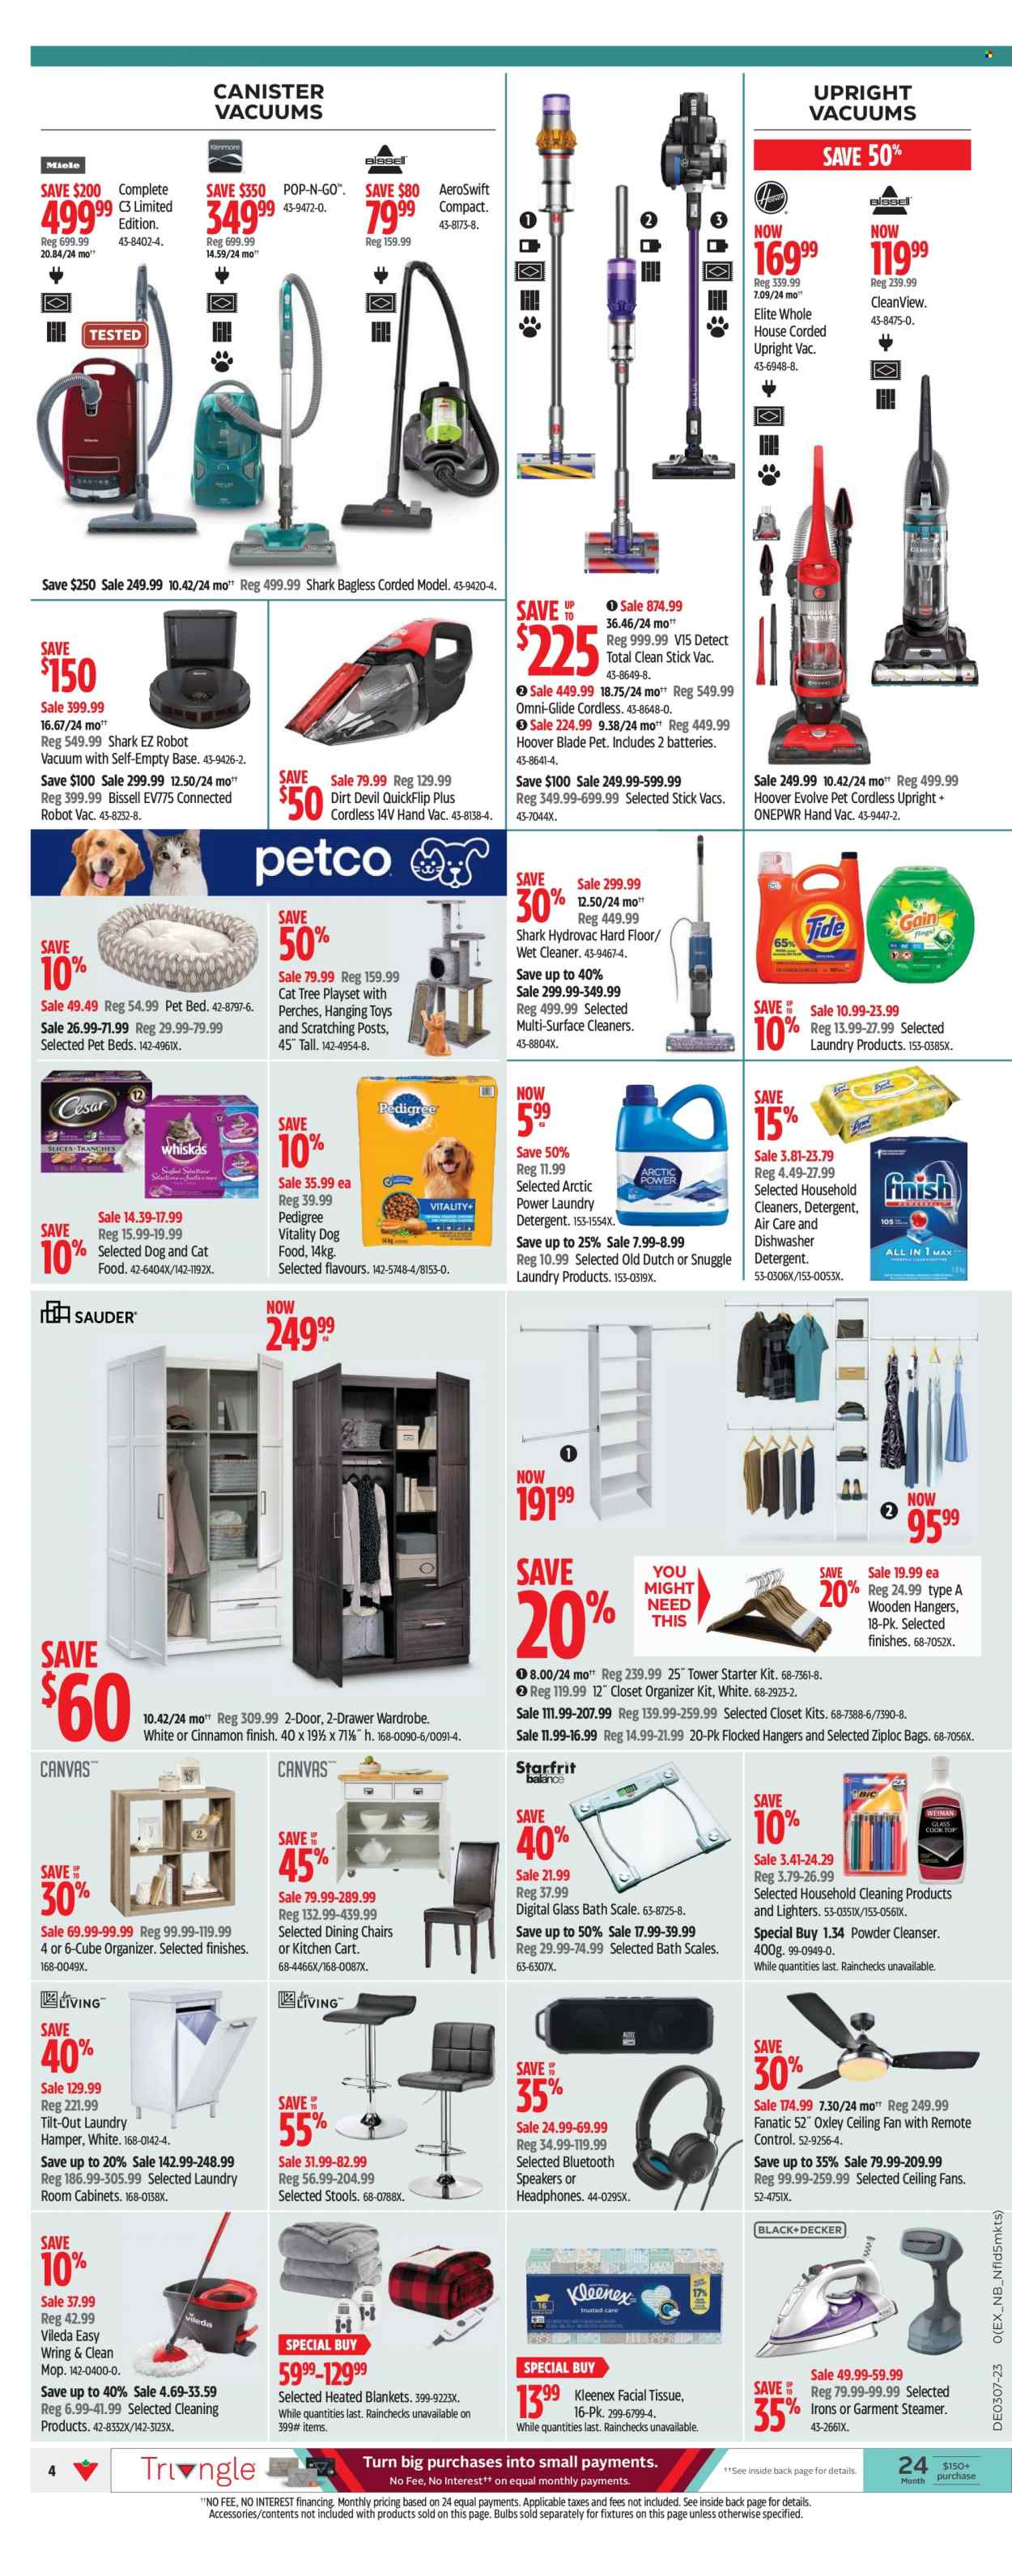 thumbnail - Canadian Tire Flyer - February 10, 2023 - February 16, 2023 - Sales products - chair, omni, scale, personal scale, Kleenex, tissues, cleaner, Snuggle, laundry detergent, cleanser, Ziploc, hanger, Vileda, laundry hamper, mop, canister, bulb, blanket, animal food, pet bed, cat tree, cat food, dog food, Pedigree, speaker, headphones, remote control, ceiling fan, Bissell, robot vacuum, garment steamer, kitchen cart, wardrobe, closet system, play set, cart, detergent. Page 4.